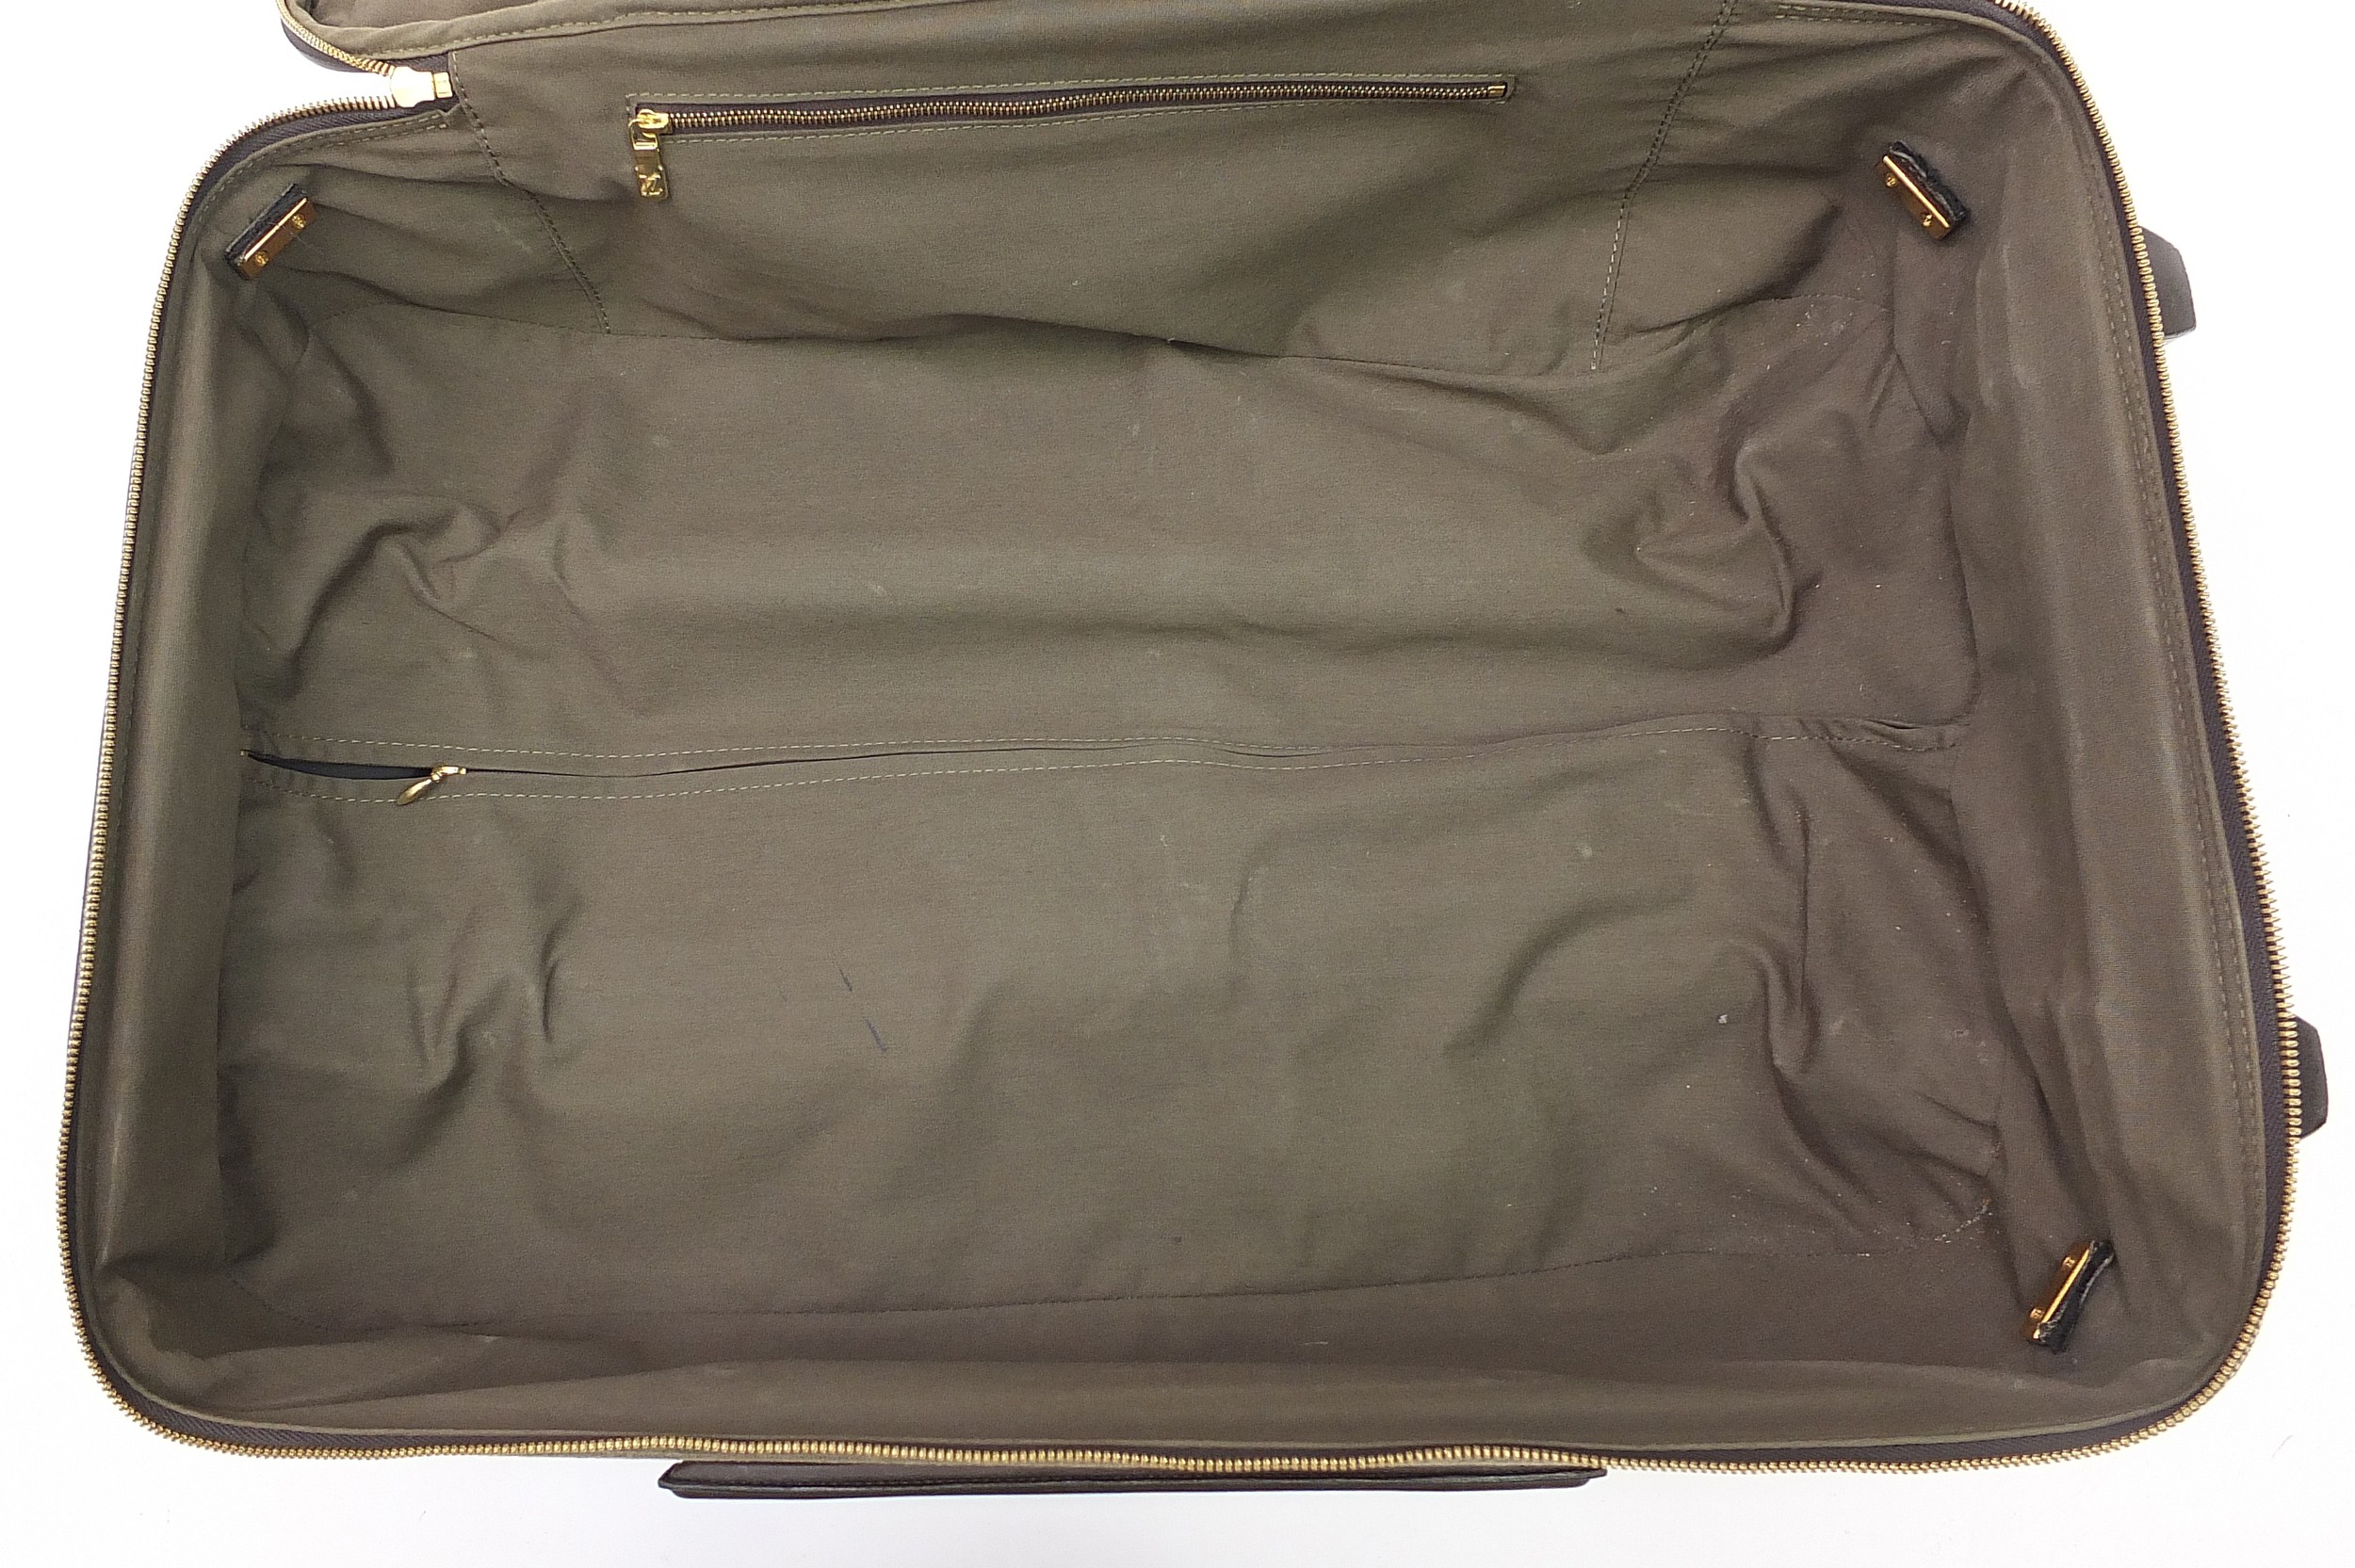 Louis Vuitton Pegase green monogrammed canvas trolley travel suitcase, serial number SP0062, 57cm - Image 7 of 11